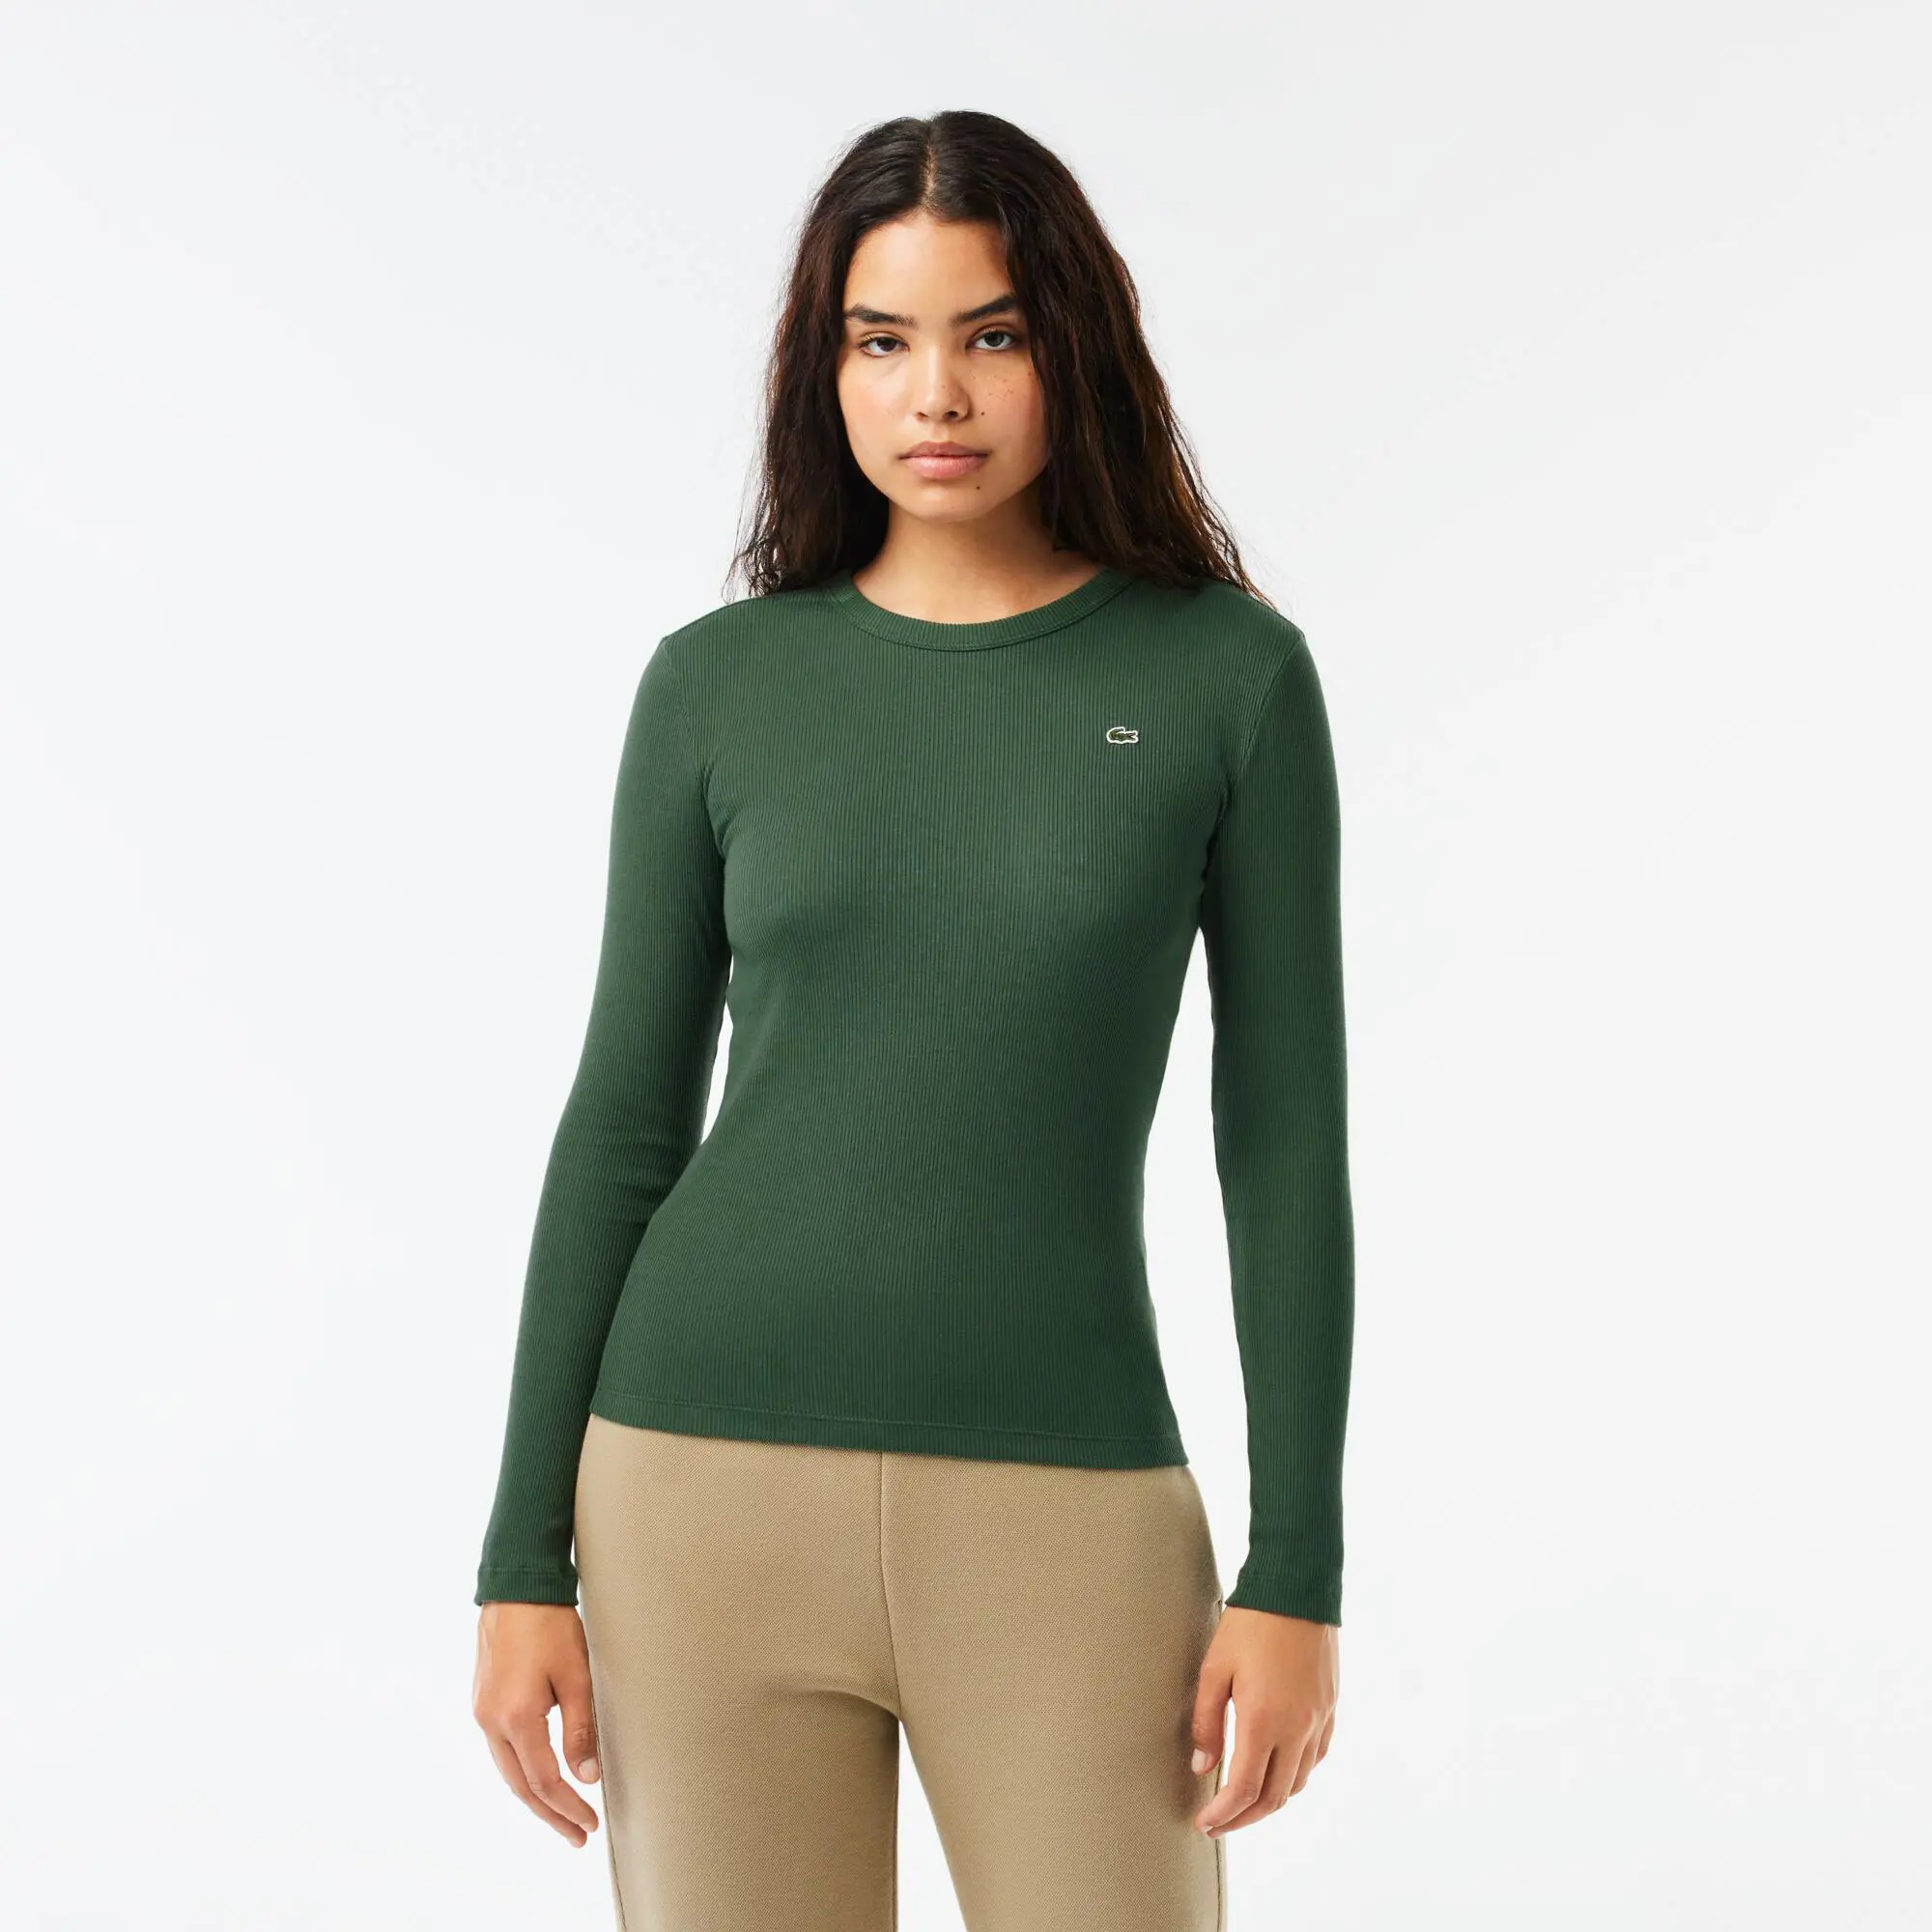 Lacoste Women's Long Sleeve Ribbed Cotton T-Shirt. 1